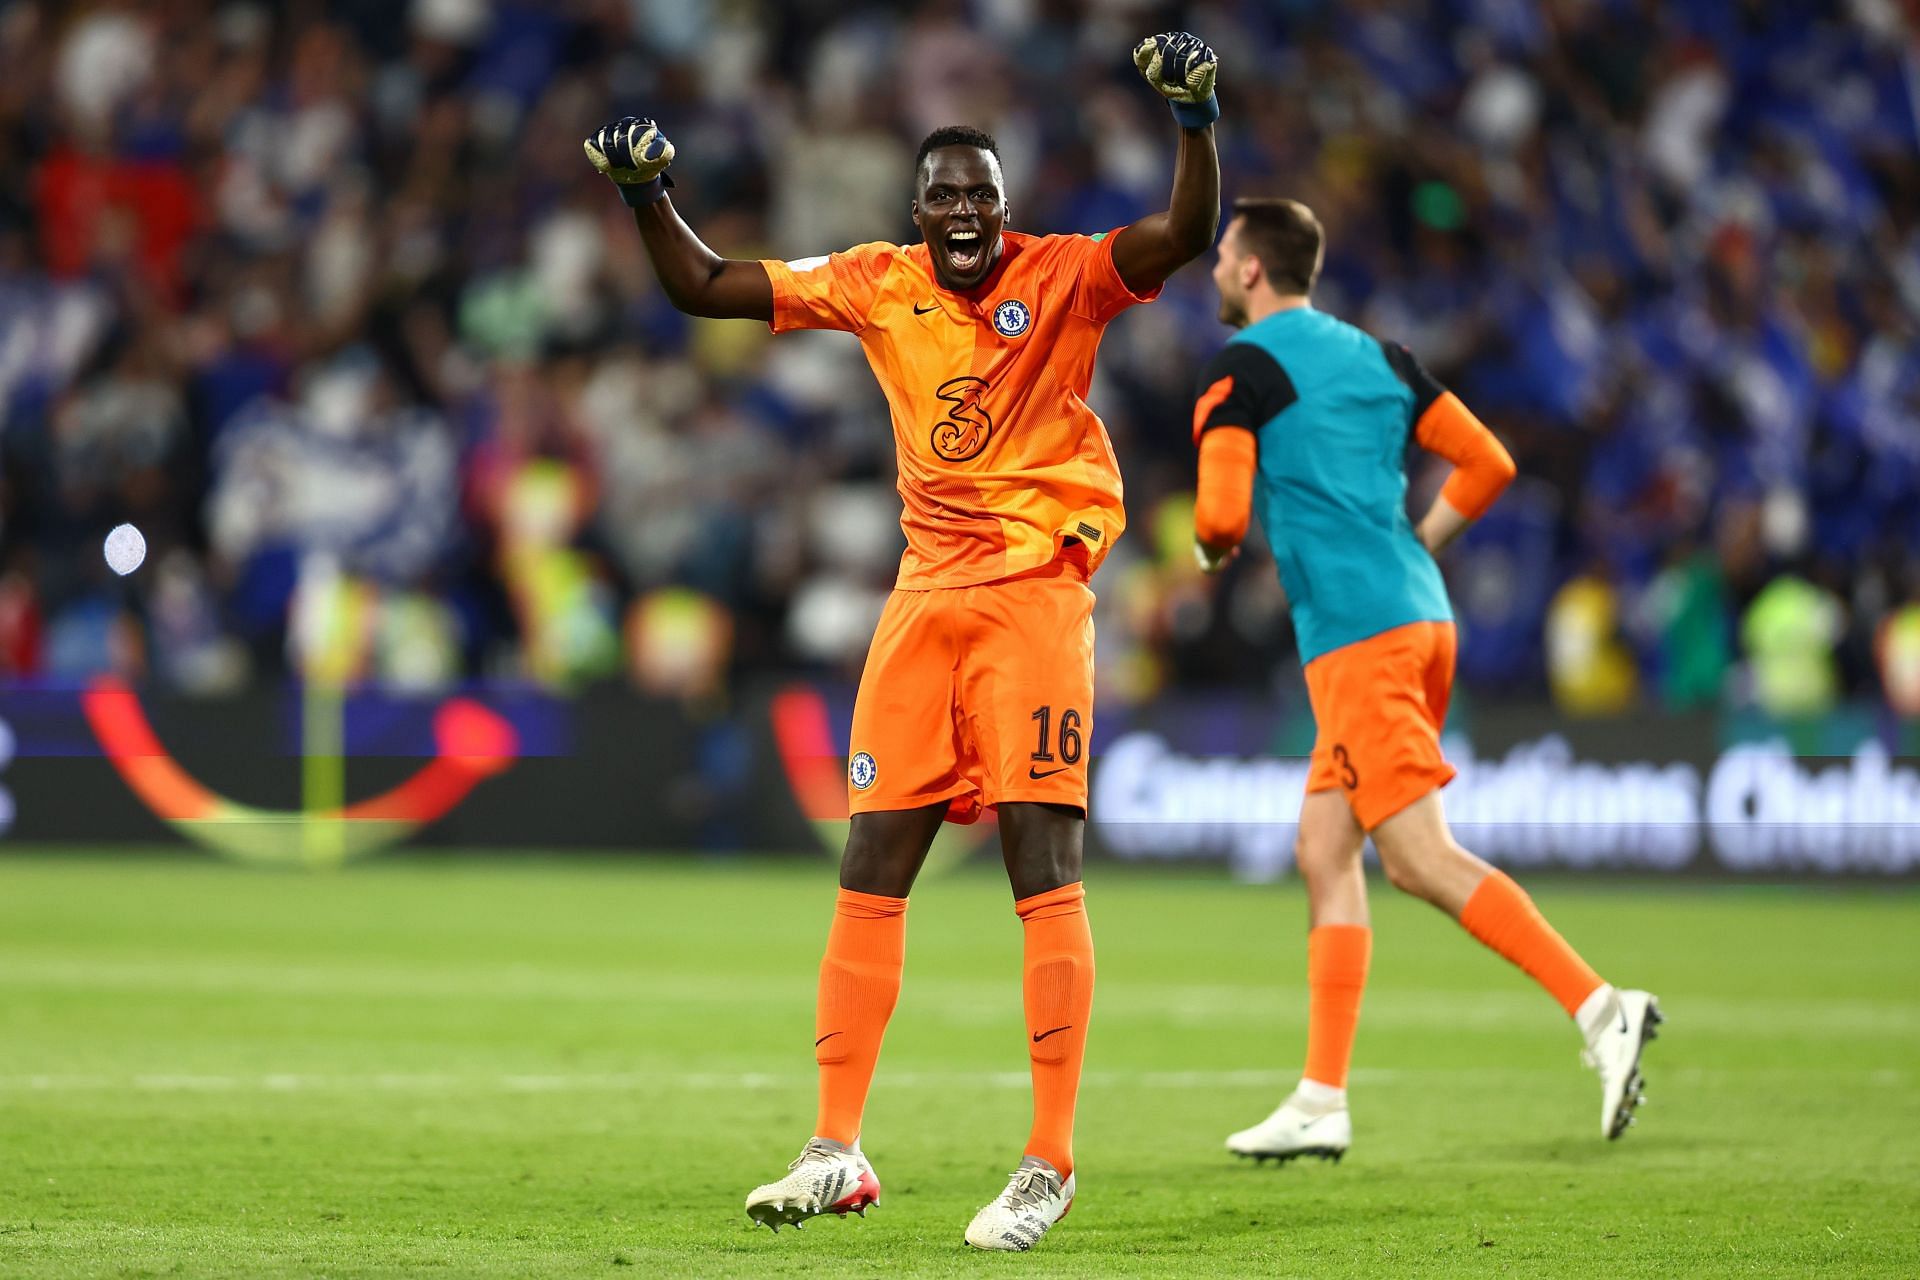 Edouard Mendy has been a great goalkeeper for the Blues